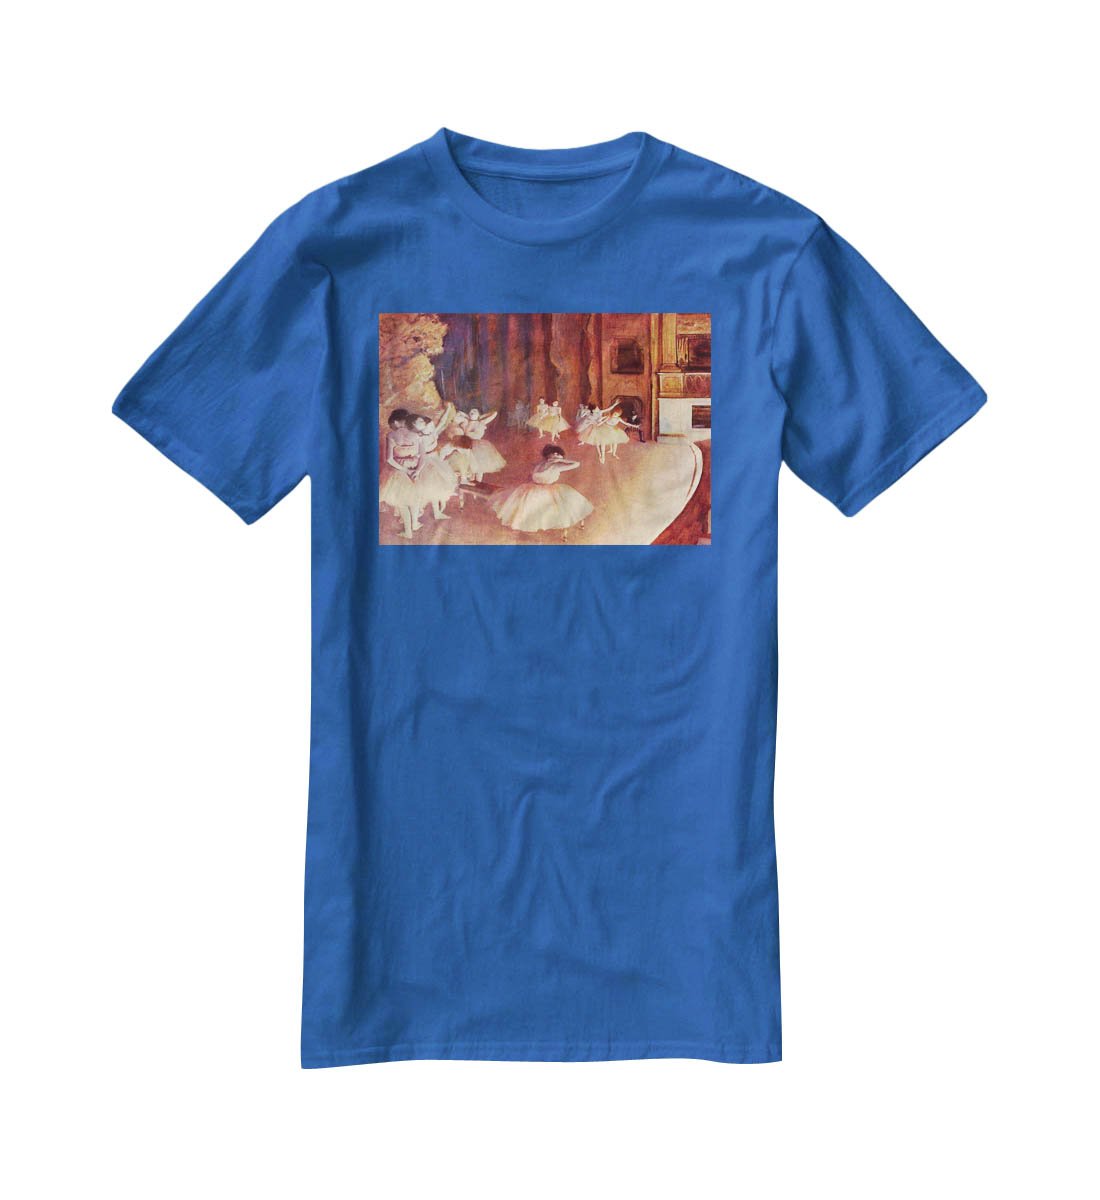 Dress rehearsal of the ballet on the stage by Degas T-Shirt - Canvas Art Rocks - 2